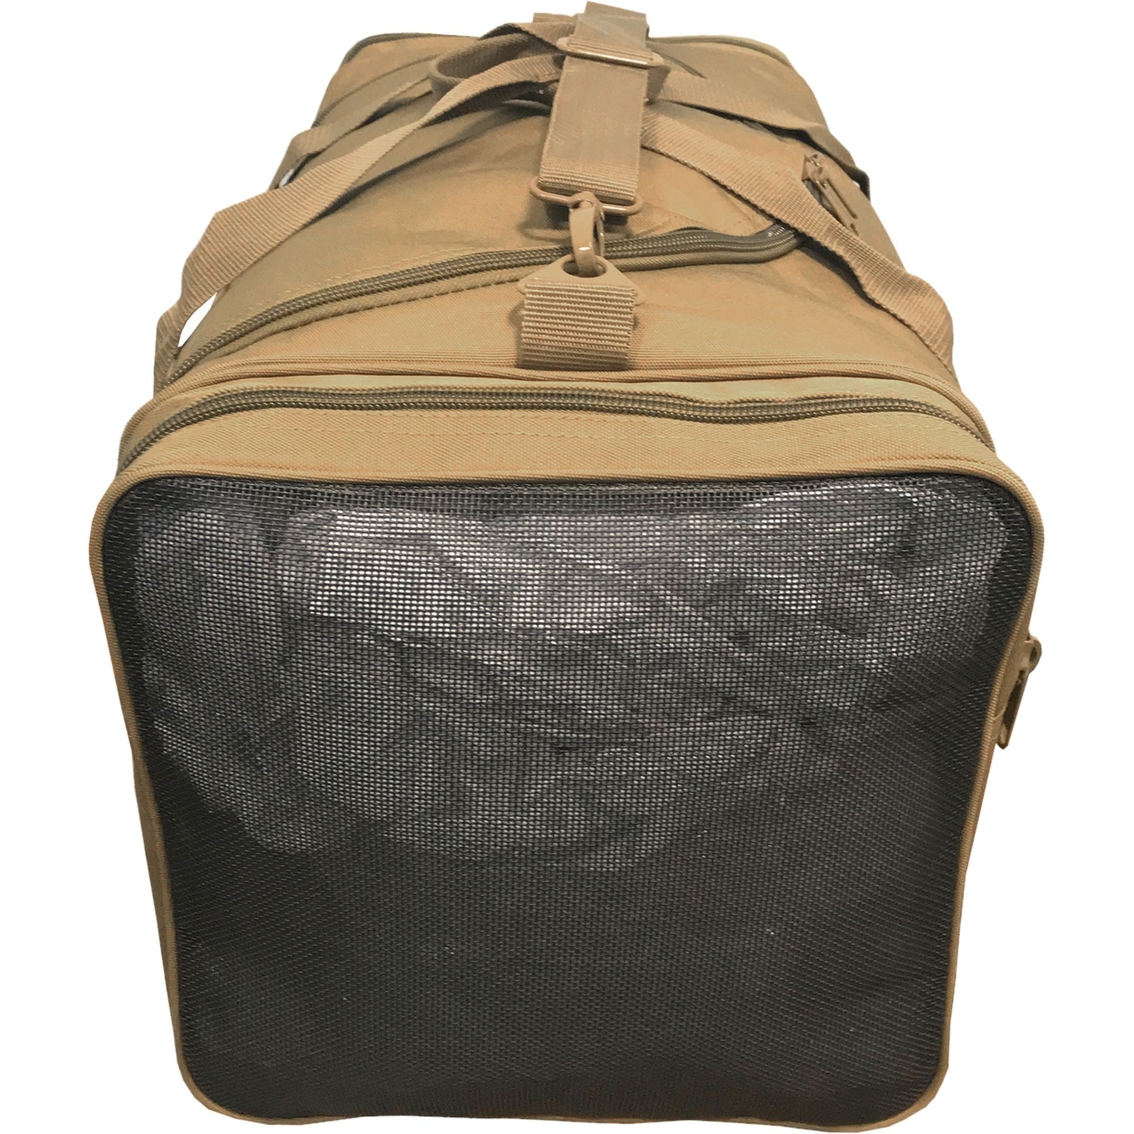 Flying Circle Square Sports Duffel - Image 2 of 4